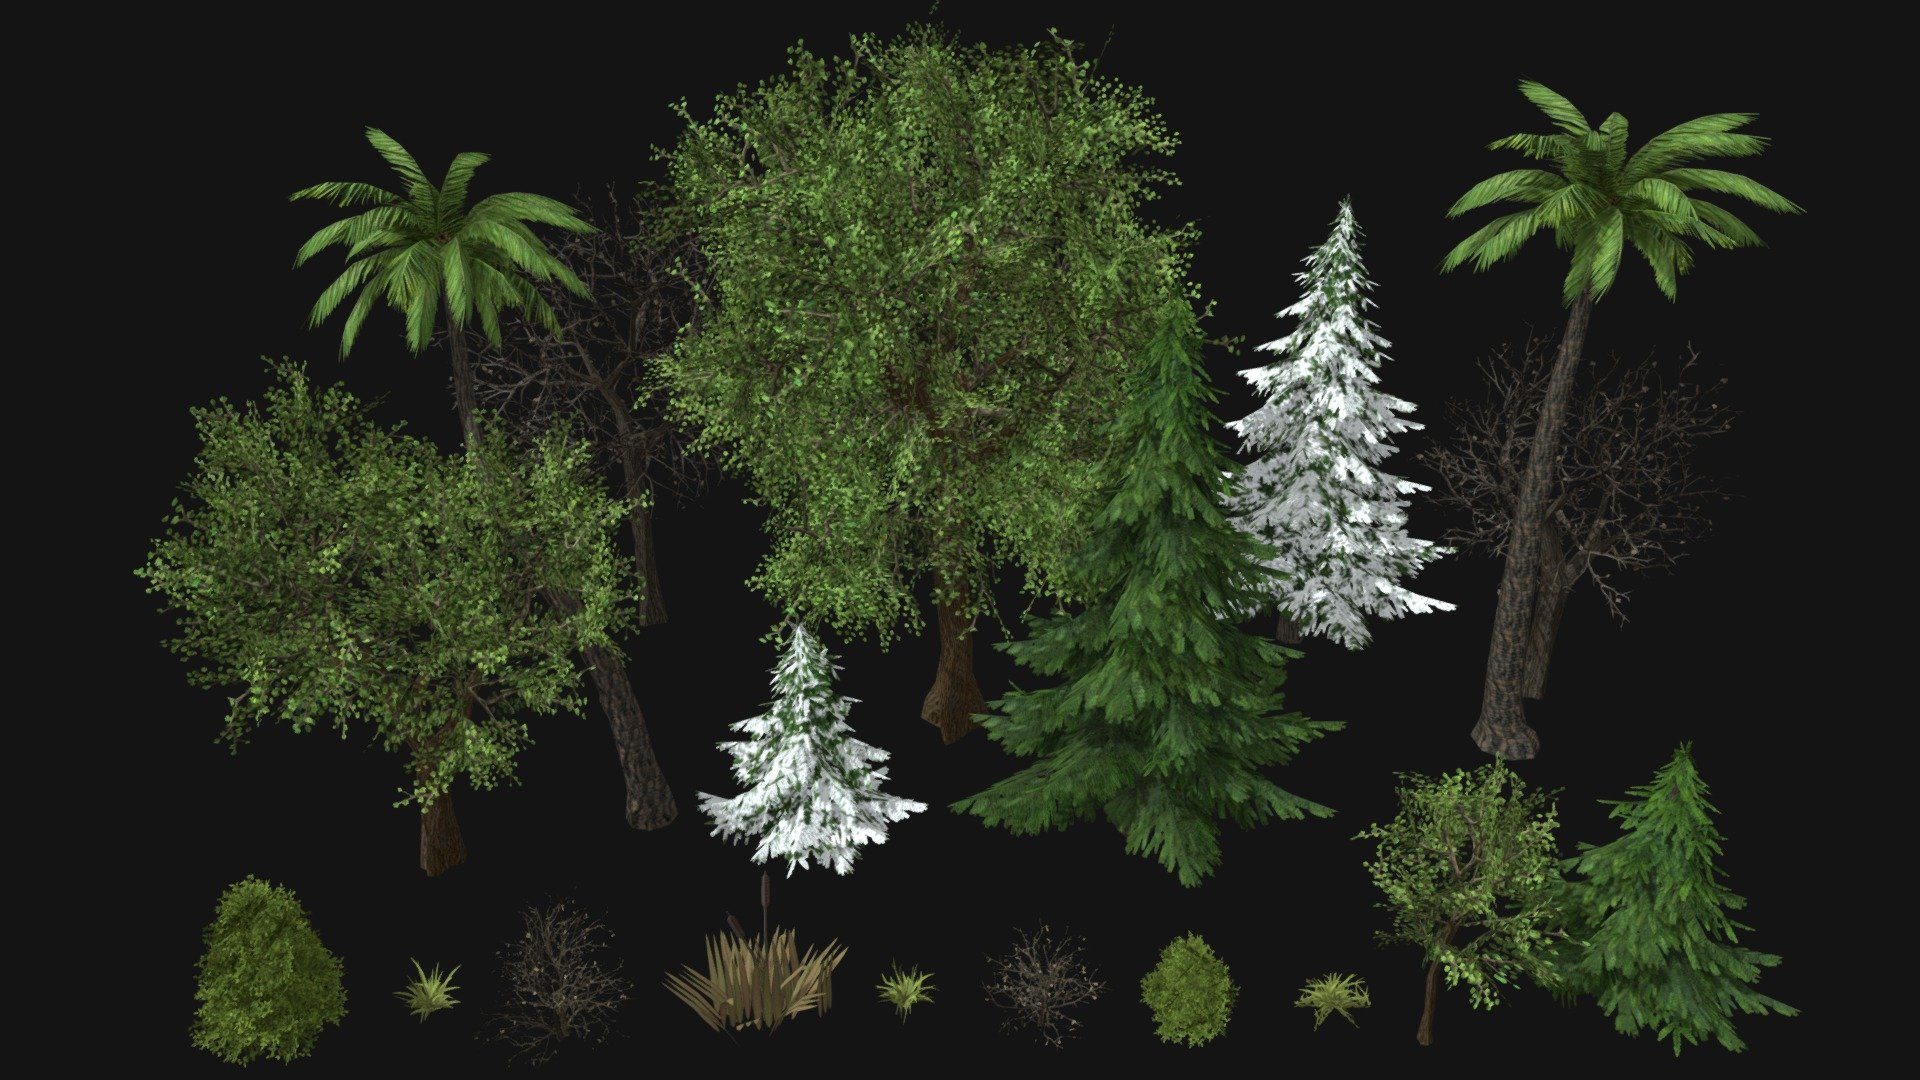 Looking for a comprehensive collection of 3D models to enhance your gaming or real-time projects? Look no further than this incredible bundle of Trees, Fir Trees, Palm Trees, Bushes, Swamp, and Grasses! With a range of vegetation options to choose from, this bundle is designed to help you create immersive and realistic environments that will captivate your audience. Whether you’re working on a new game or a 3D visualization project, these models are perfect for adding depth and realism to your scenes. So why wait? Get your hands on this amazing bundle today and start bringing your creative vision to life! - Plant- Vegetation Pack LowPoly - Buy Royalty Free 3D model by Xylla 3d model